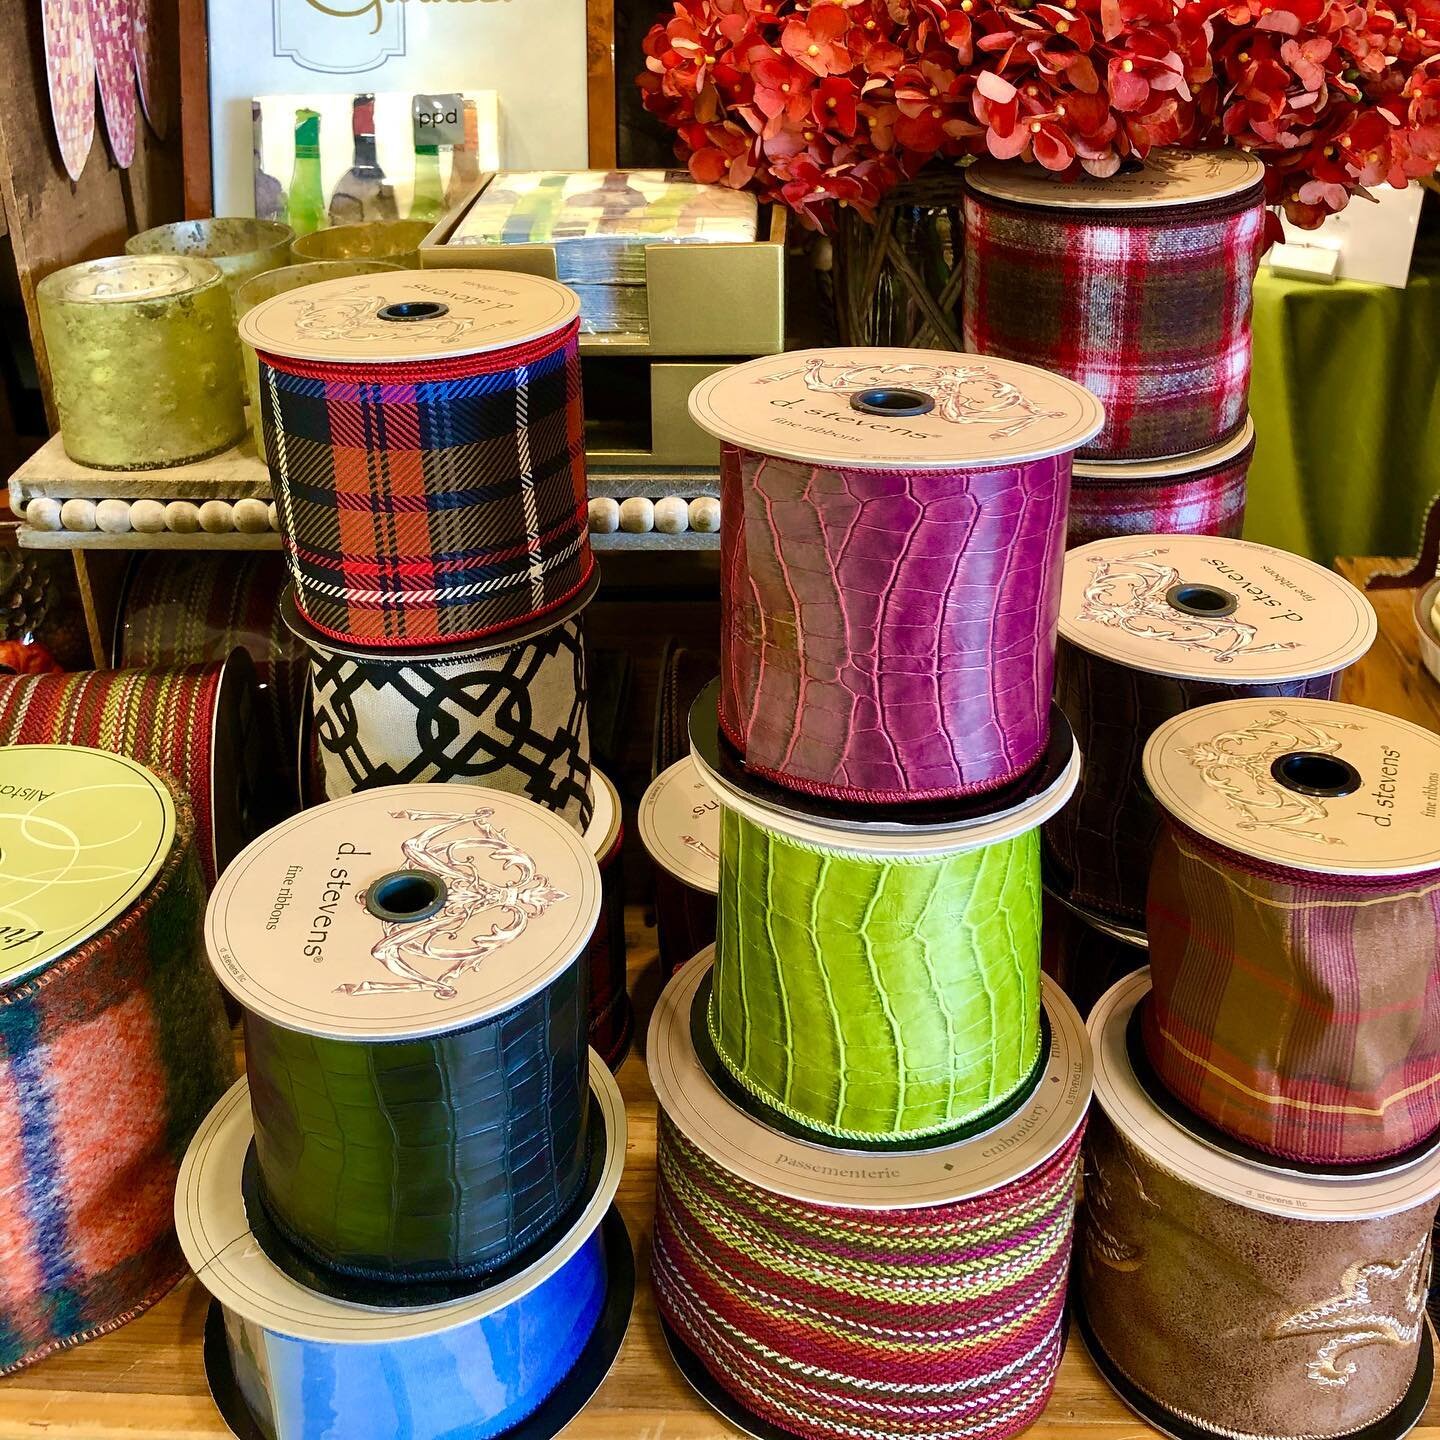 Just what you&rsquo;ve all been waiting for!  Beautiful Fall ribbons have arrived @lloydandlady boutiques!
.
.
.
#ribbon #ribbons #fallribbon #shoplocal #shopsmall #boutiqueshopping #boutique #shopraleigh #floraldesign